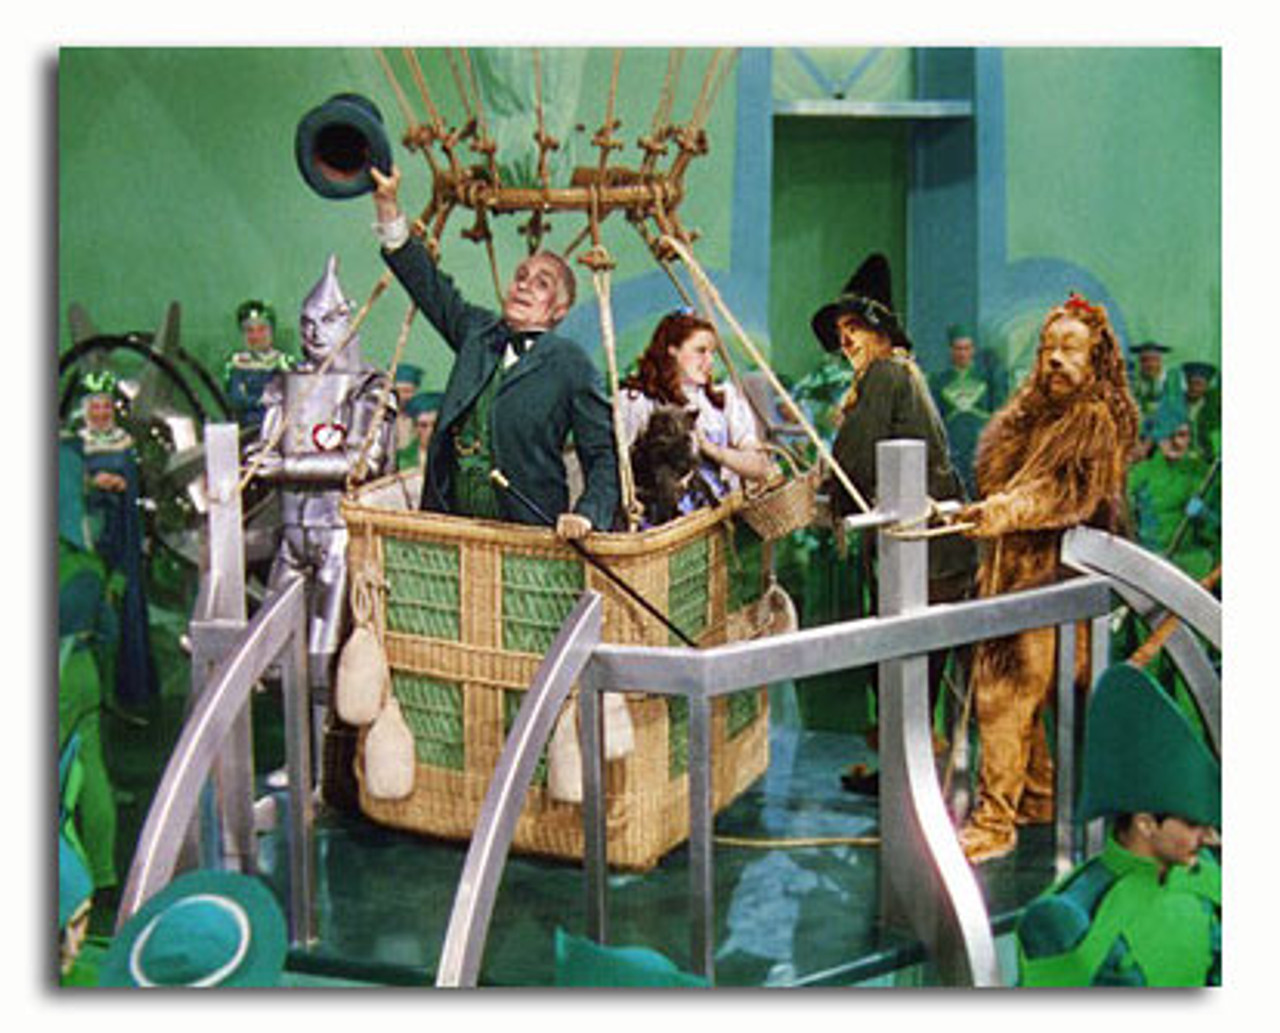 SS3509441) Movie picture of The Wizard of Oz buy celebrity photo and posters at Starstills.com